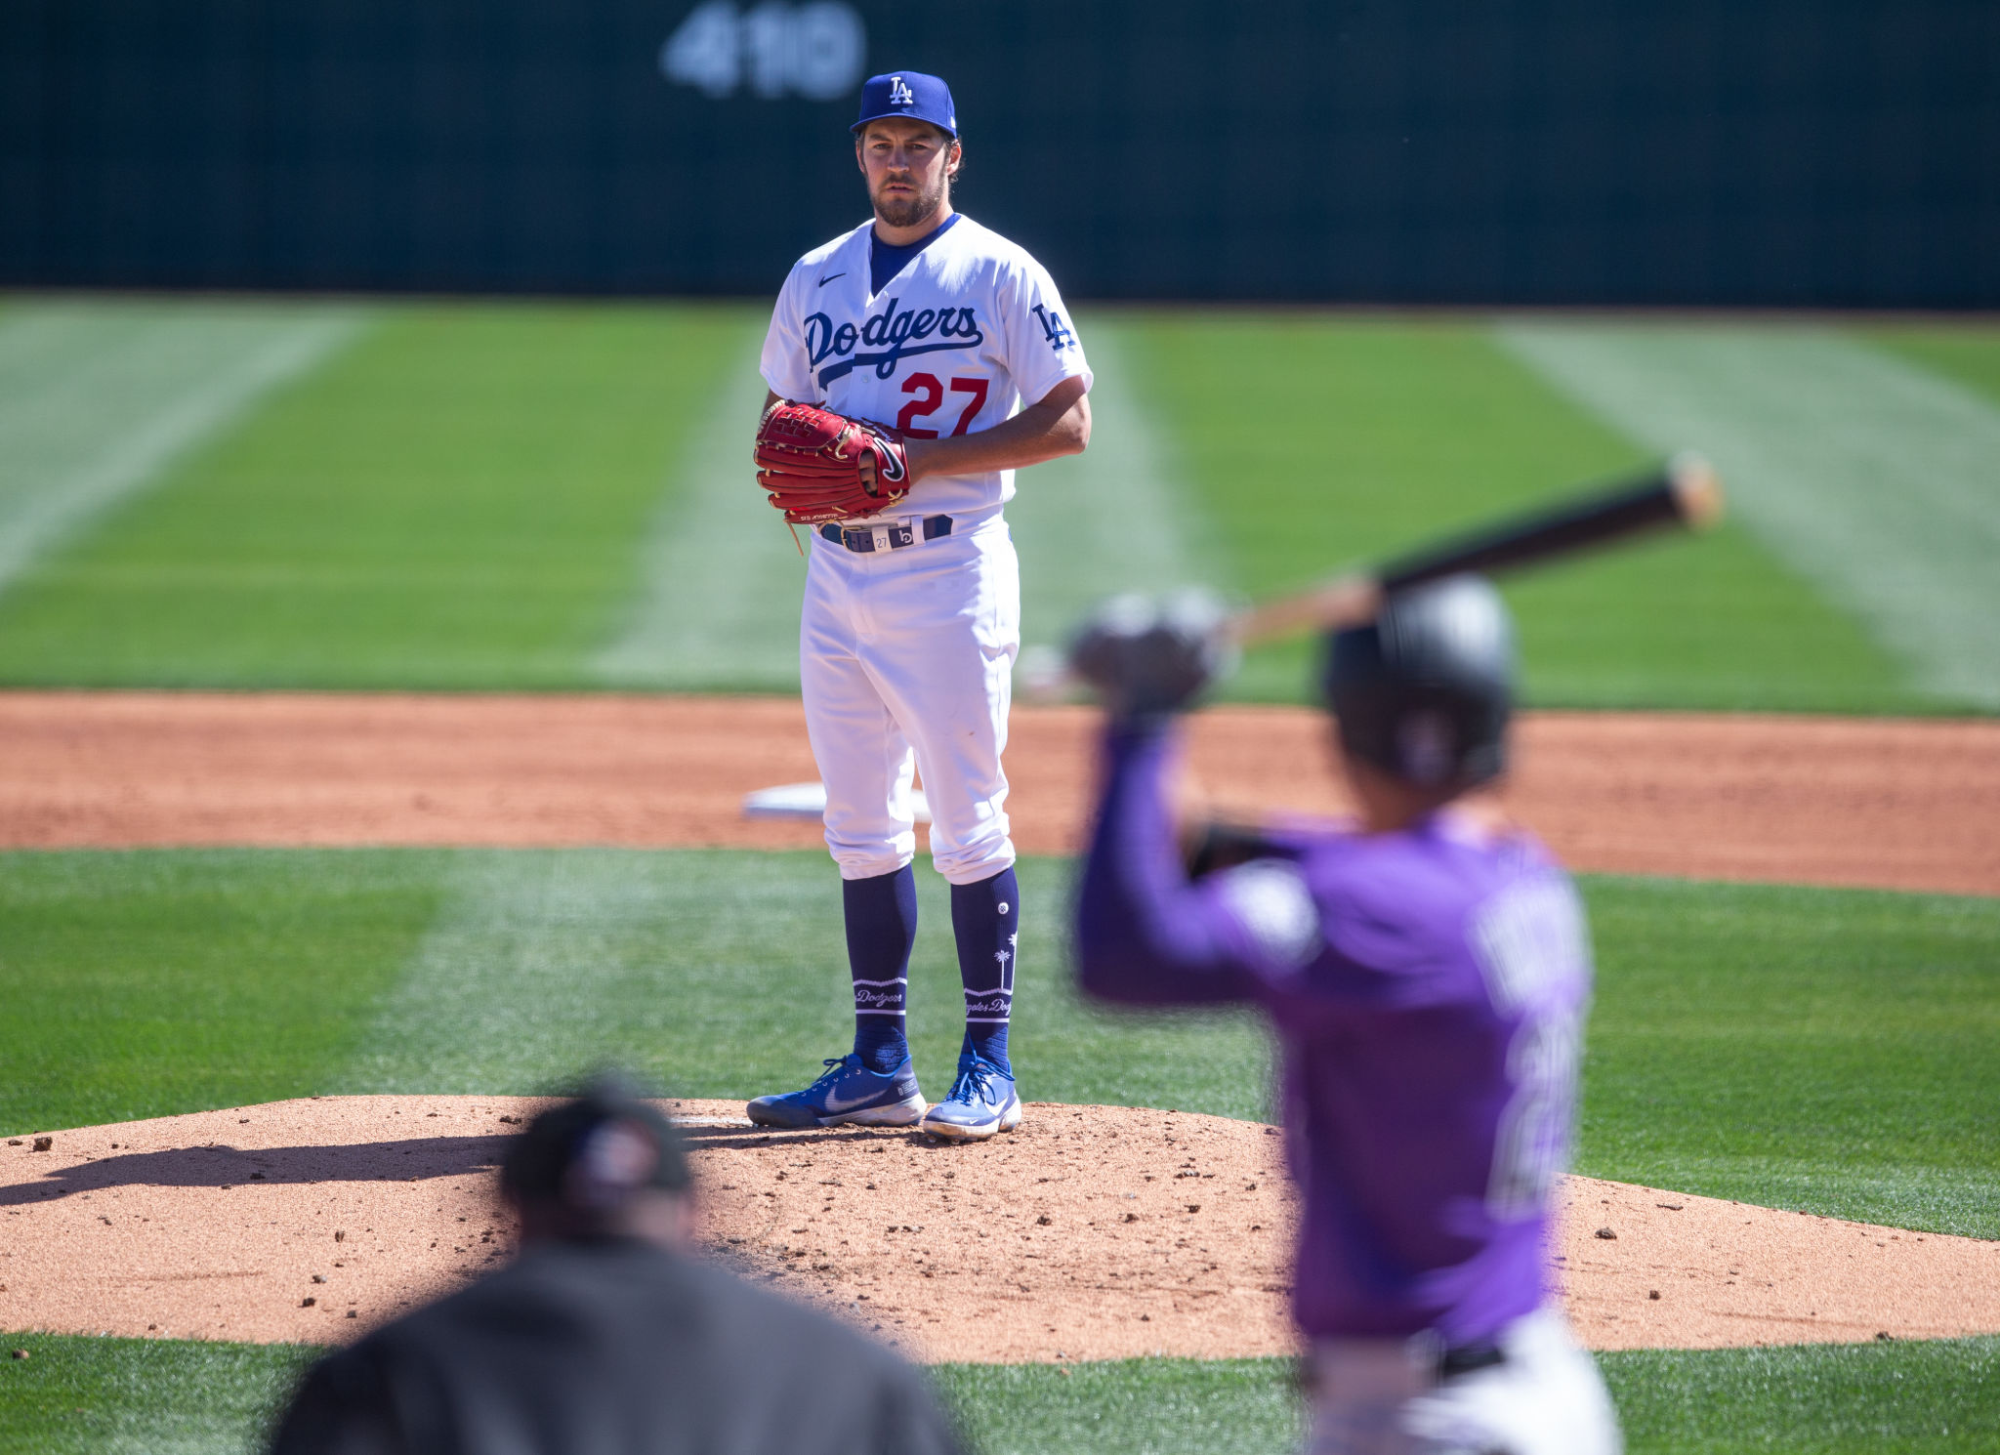 Trevor Bauer pitches for the Dodgers in a spring training game against the Colorado Rockies in March 2021.